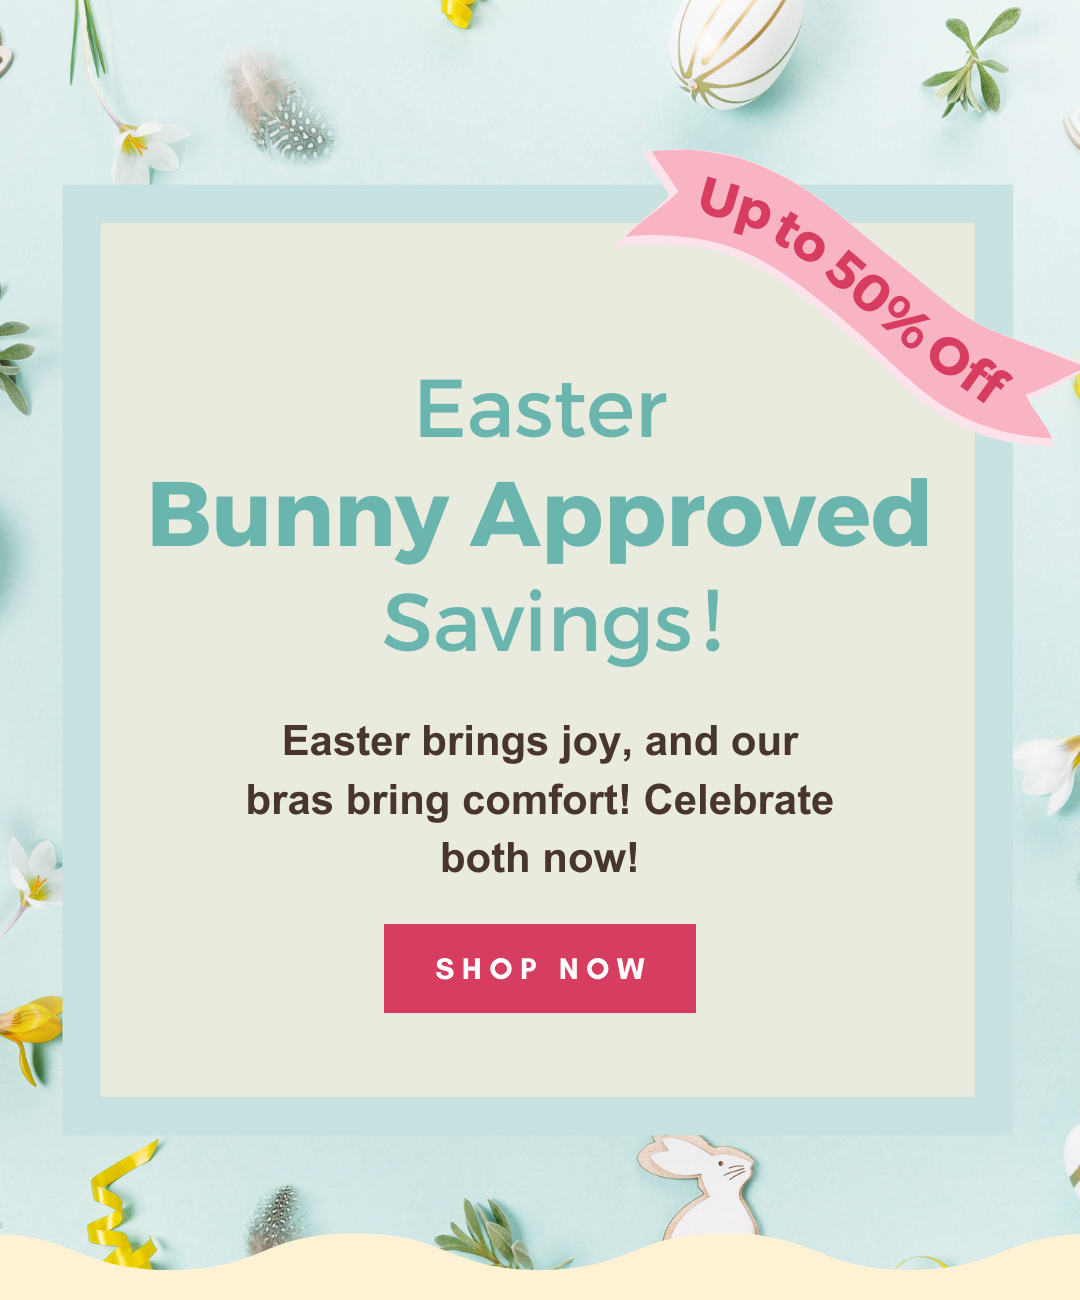 Easter Savings Have Arrived! Up to 50% Off Bras!